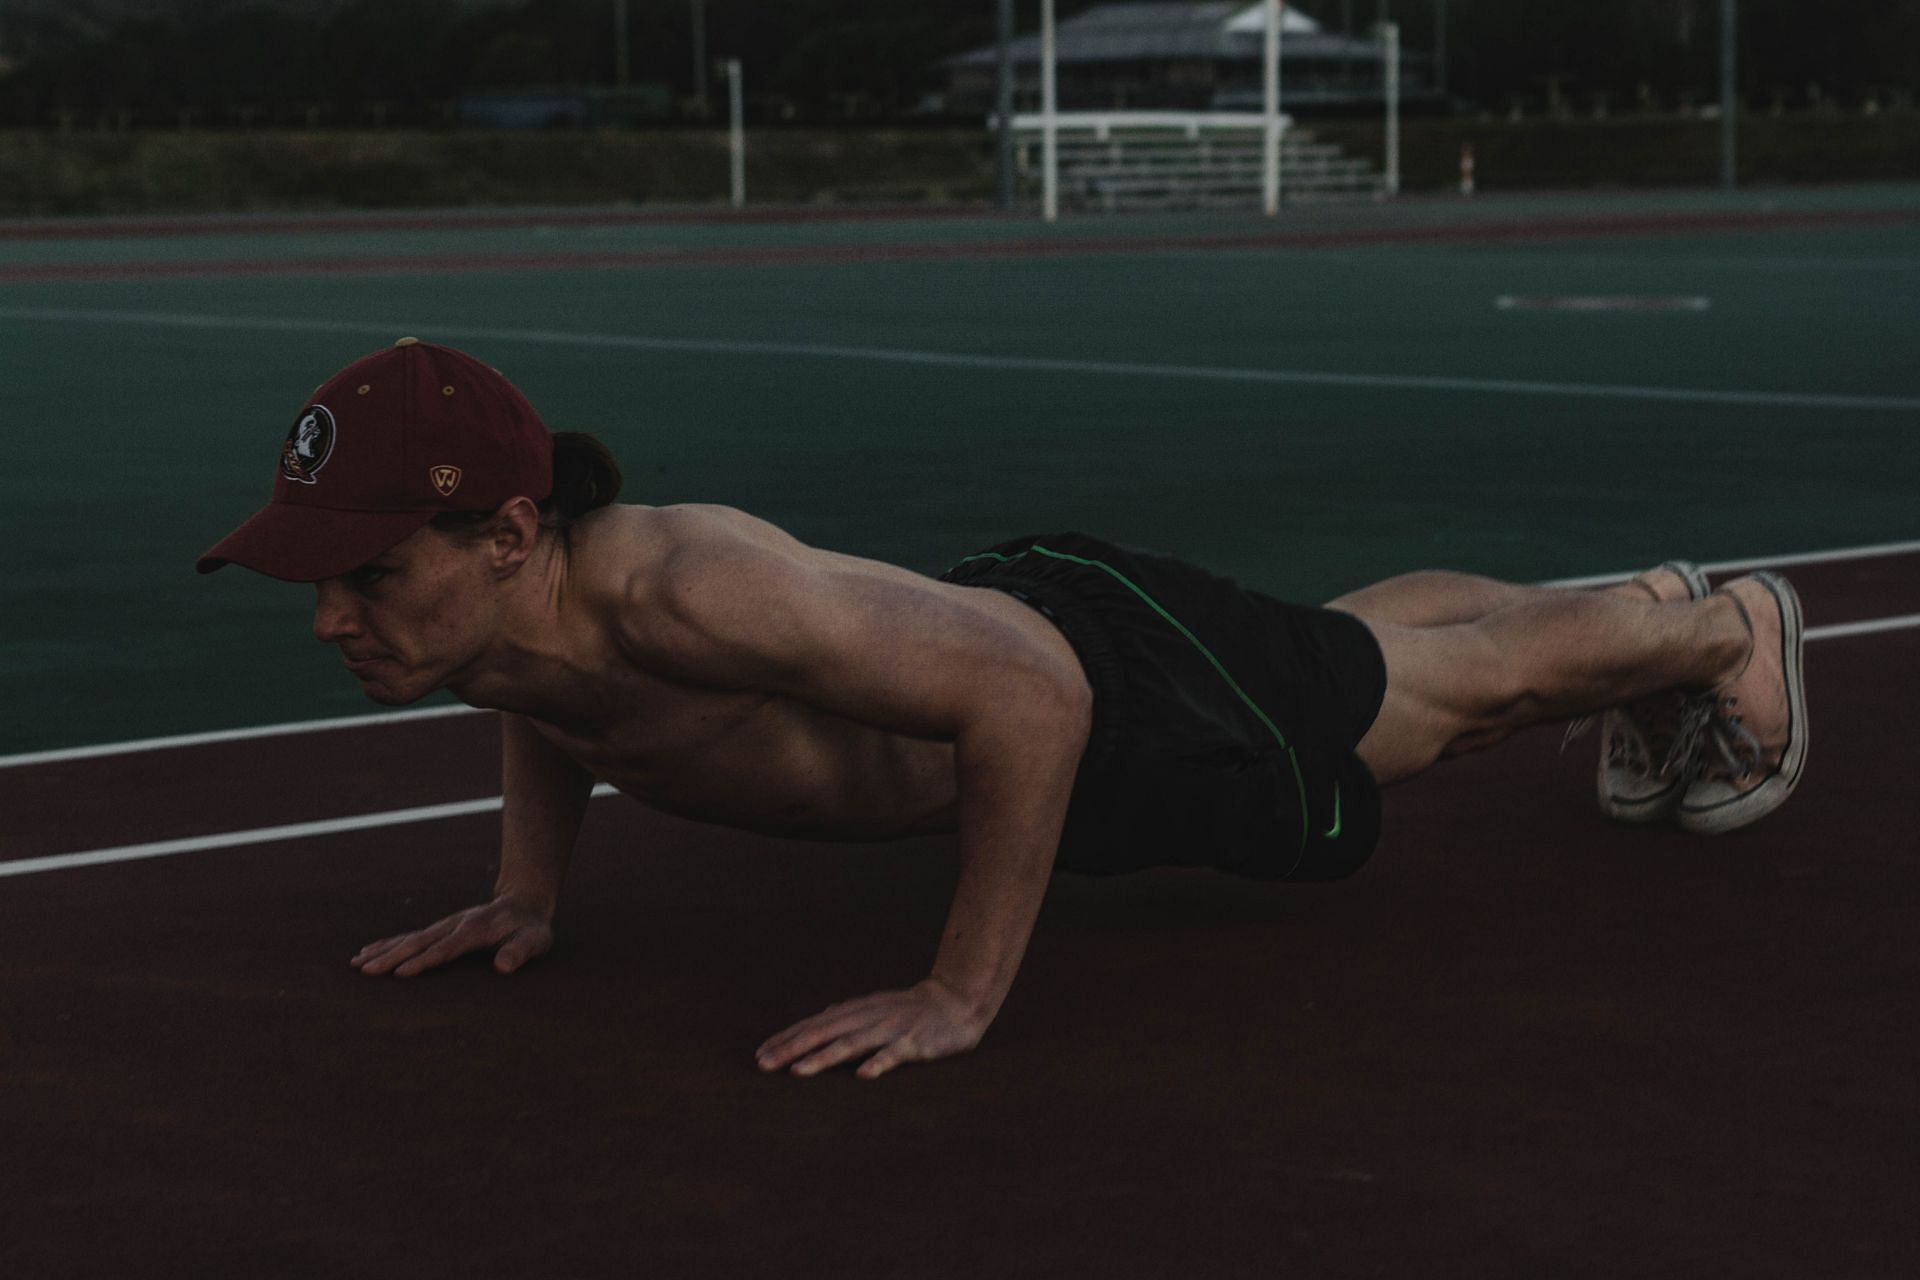 Burpees stresses your tendon and puts pressure on heart. (Image by James Barr / Pexels)